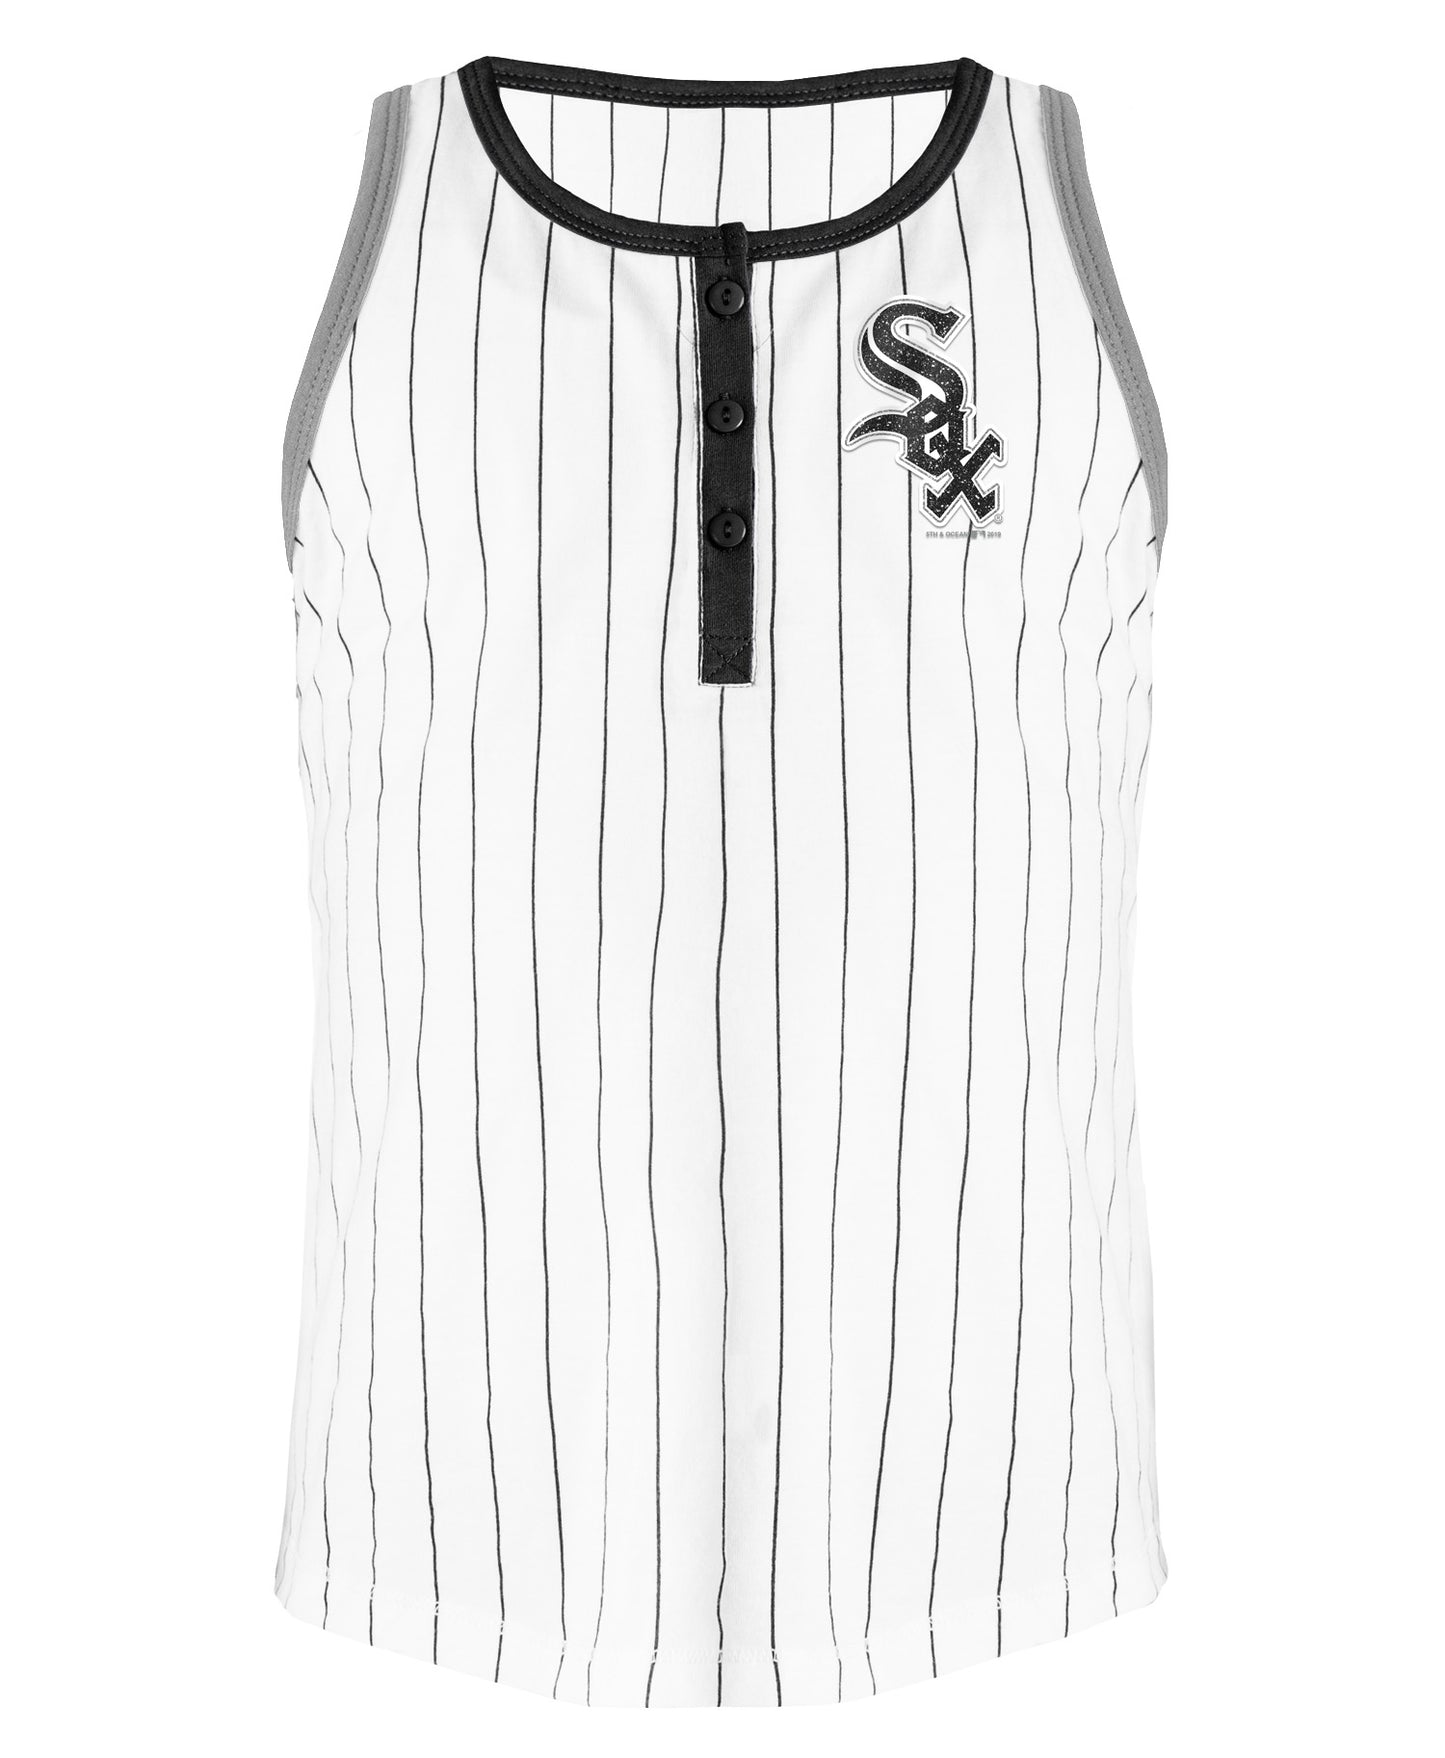 Chicago White Sox Youth Pinstripe Racer Back w Black Binding & Current Logo Tank